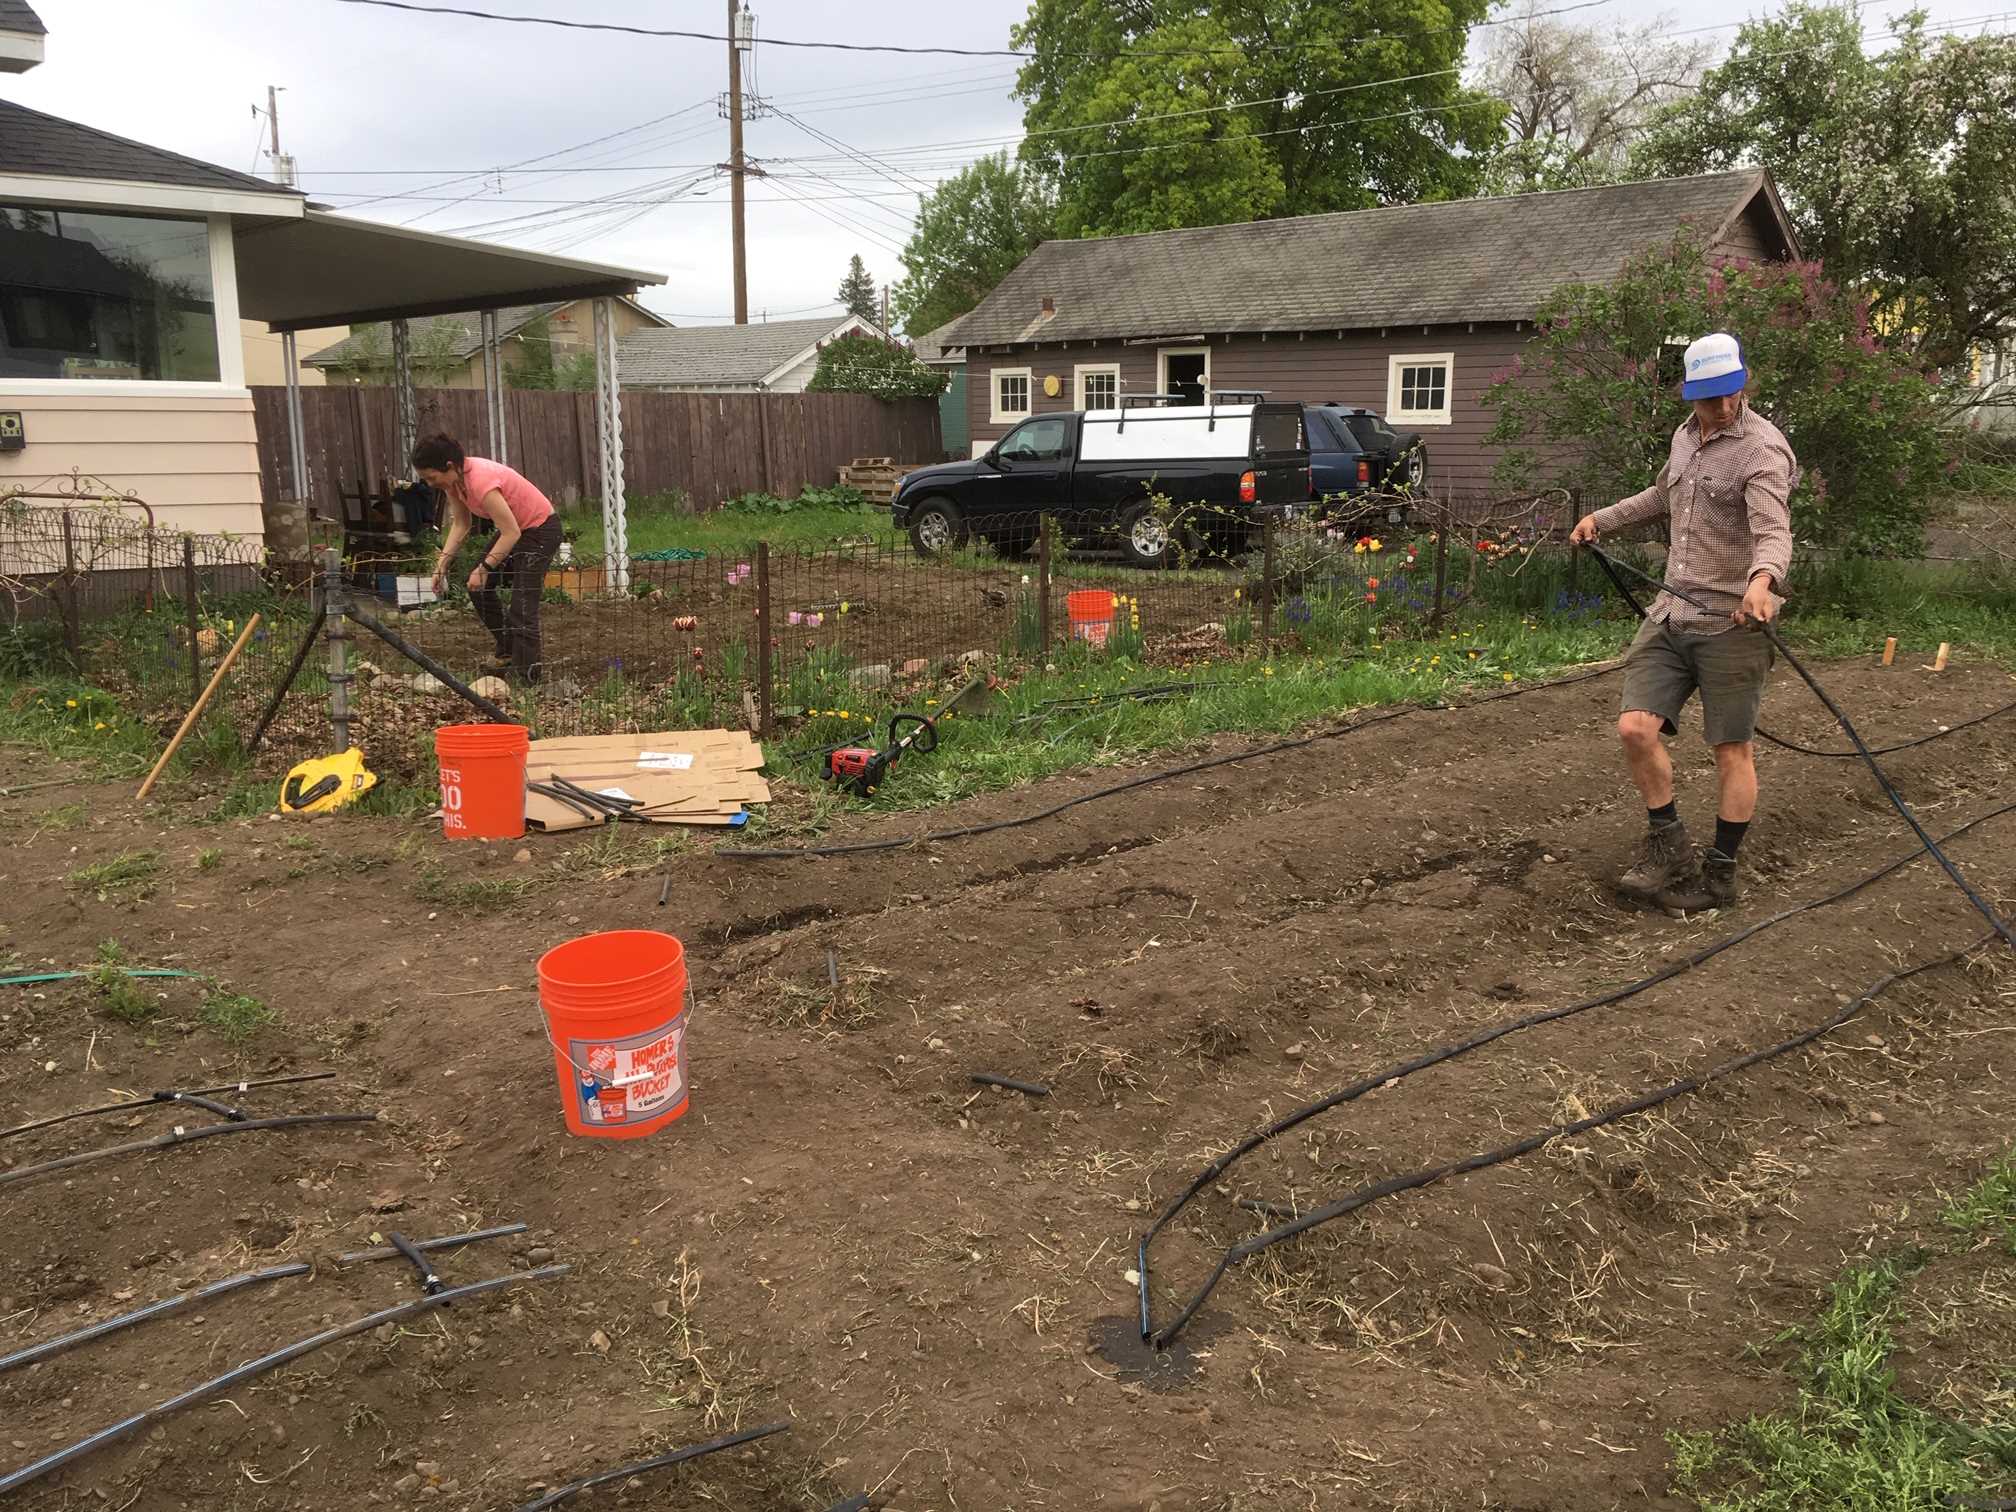 People setting up their garden irrigation.